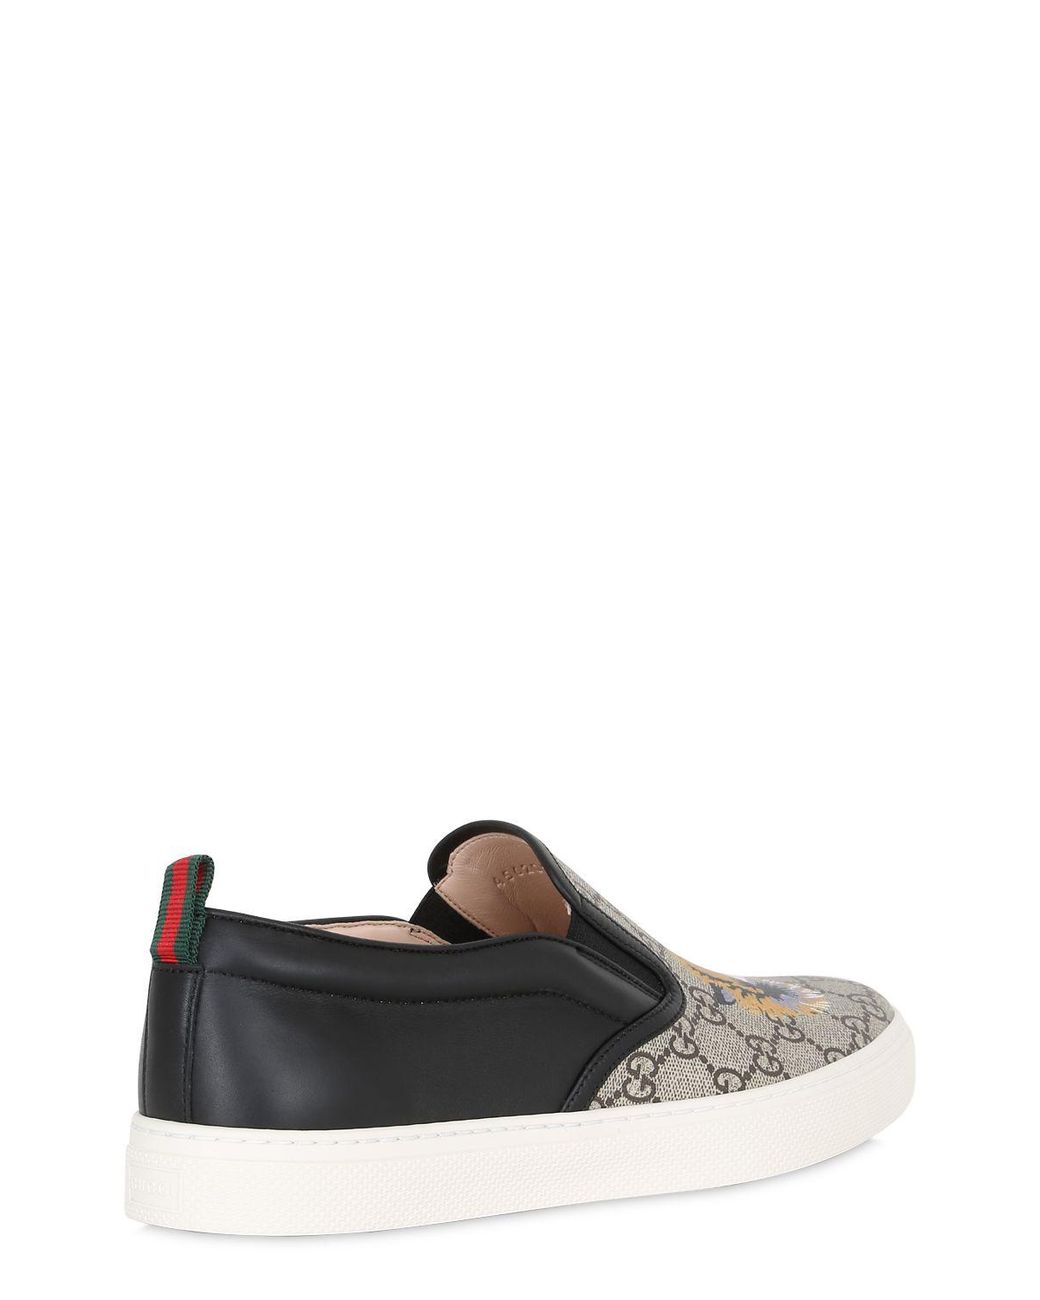 Gucci Tiger Print Gg Supreme Slip On Sneakers in Natural for Men | Lyst